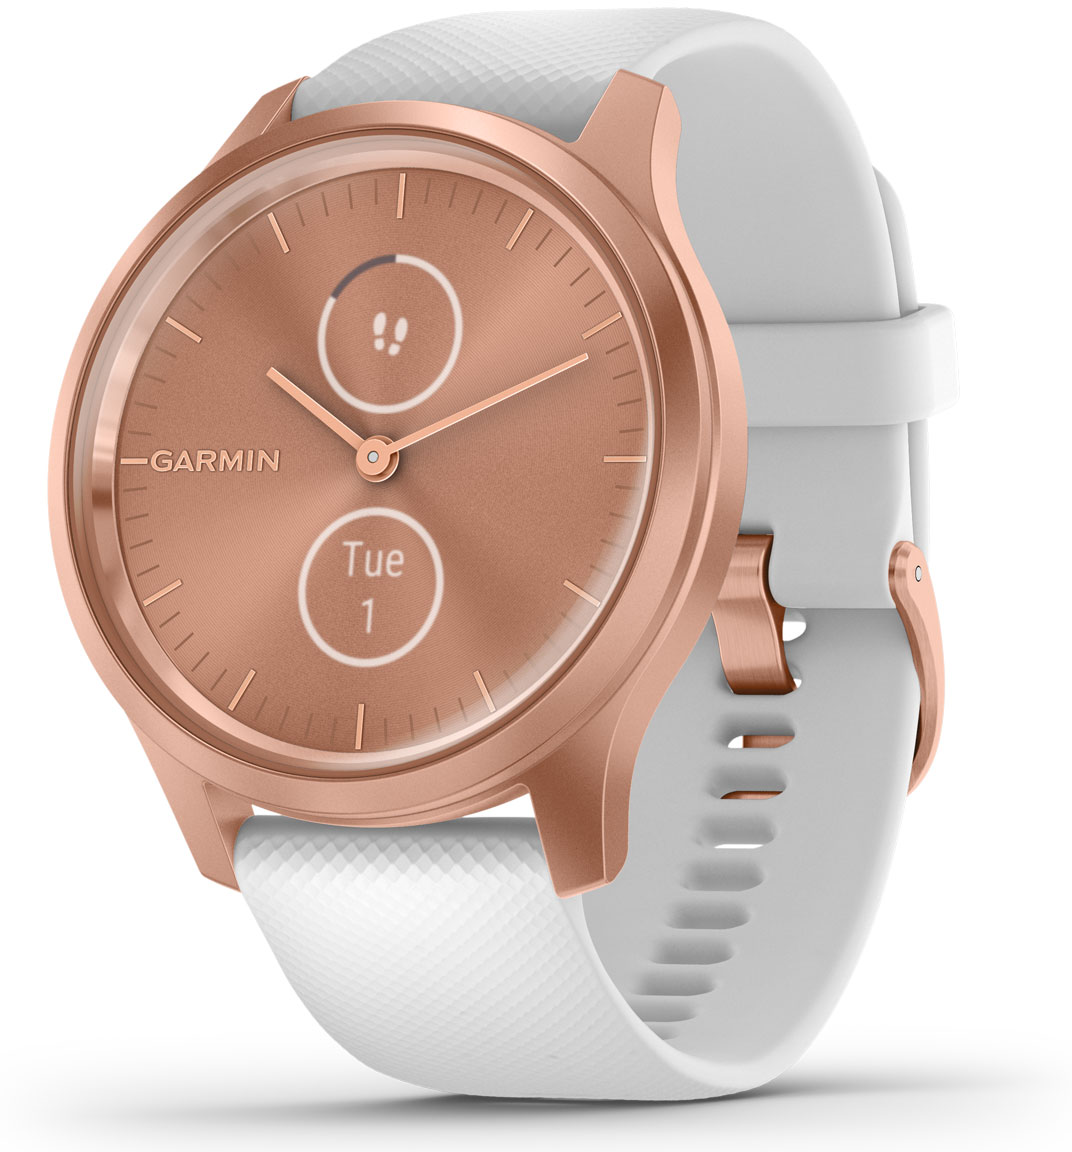 stå Middelhavet Twisted Garmin Vivomove Style White Silicone and Rose Gold Hybrid Smart Watch  010-02240-00 - watchesonline.com